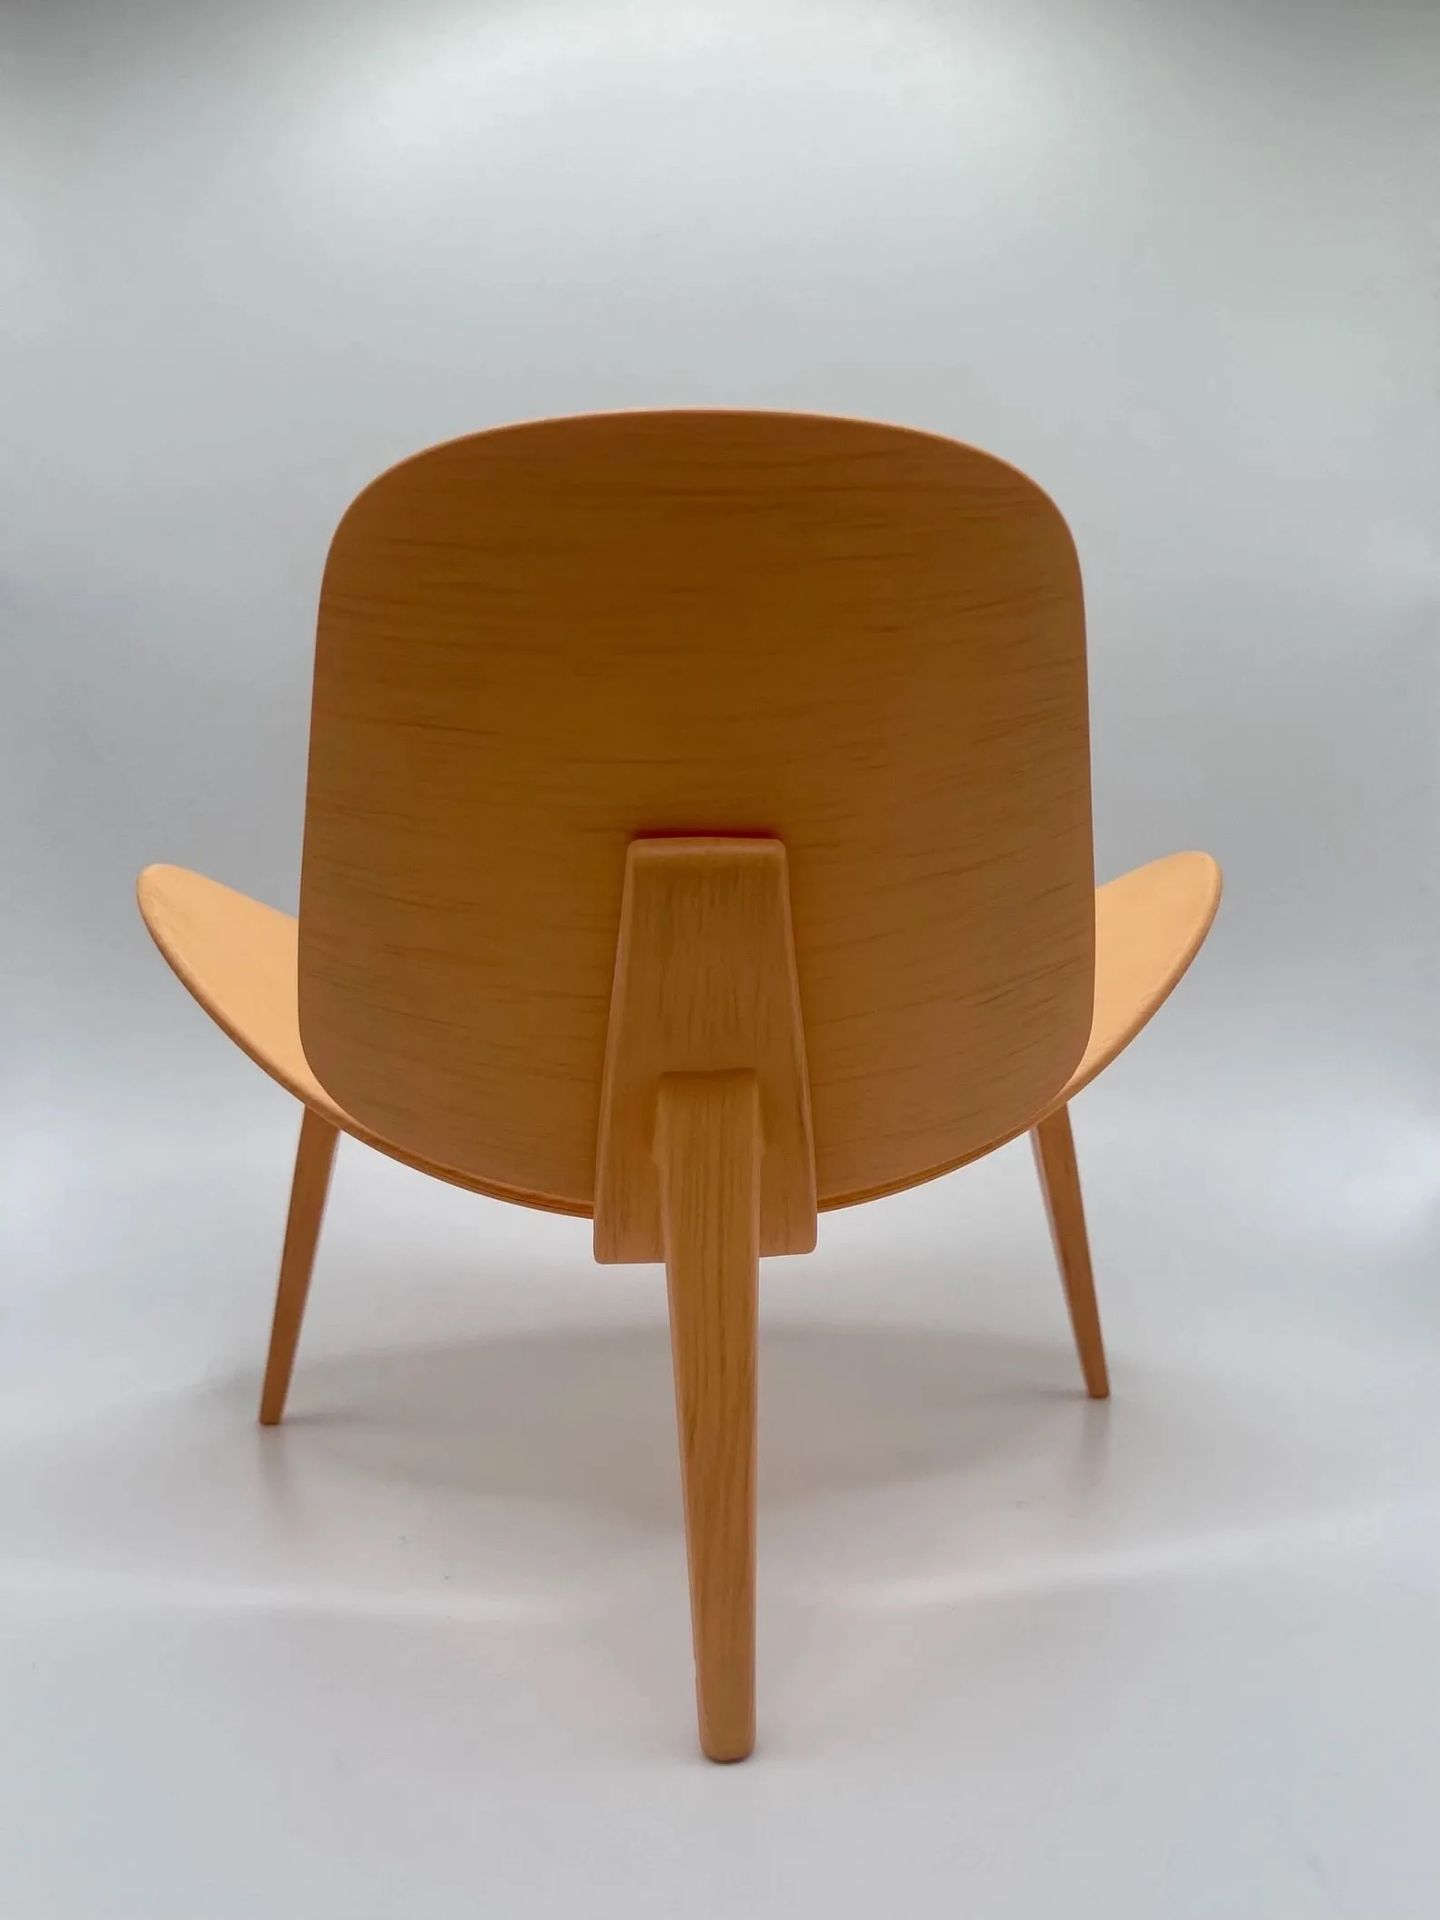 Three Hans Wegner Shell Chairs, Scale Model Desk Displays - Image 8 of 8